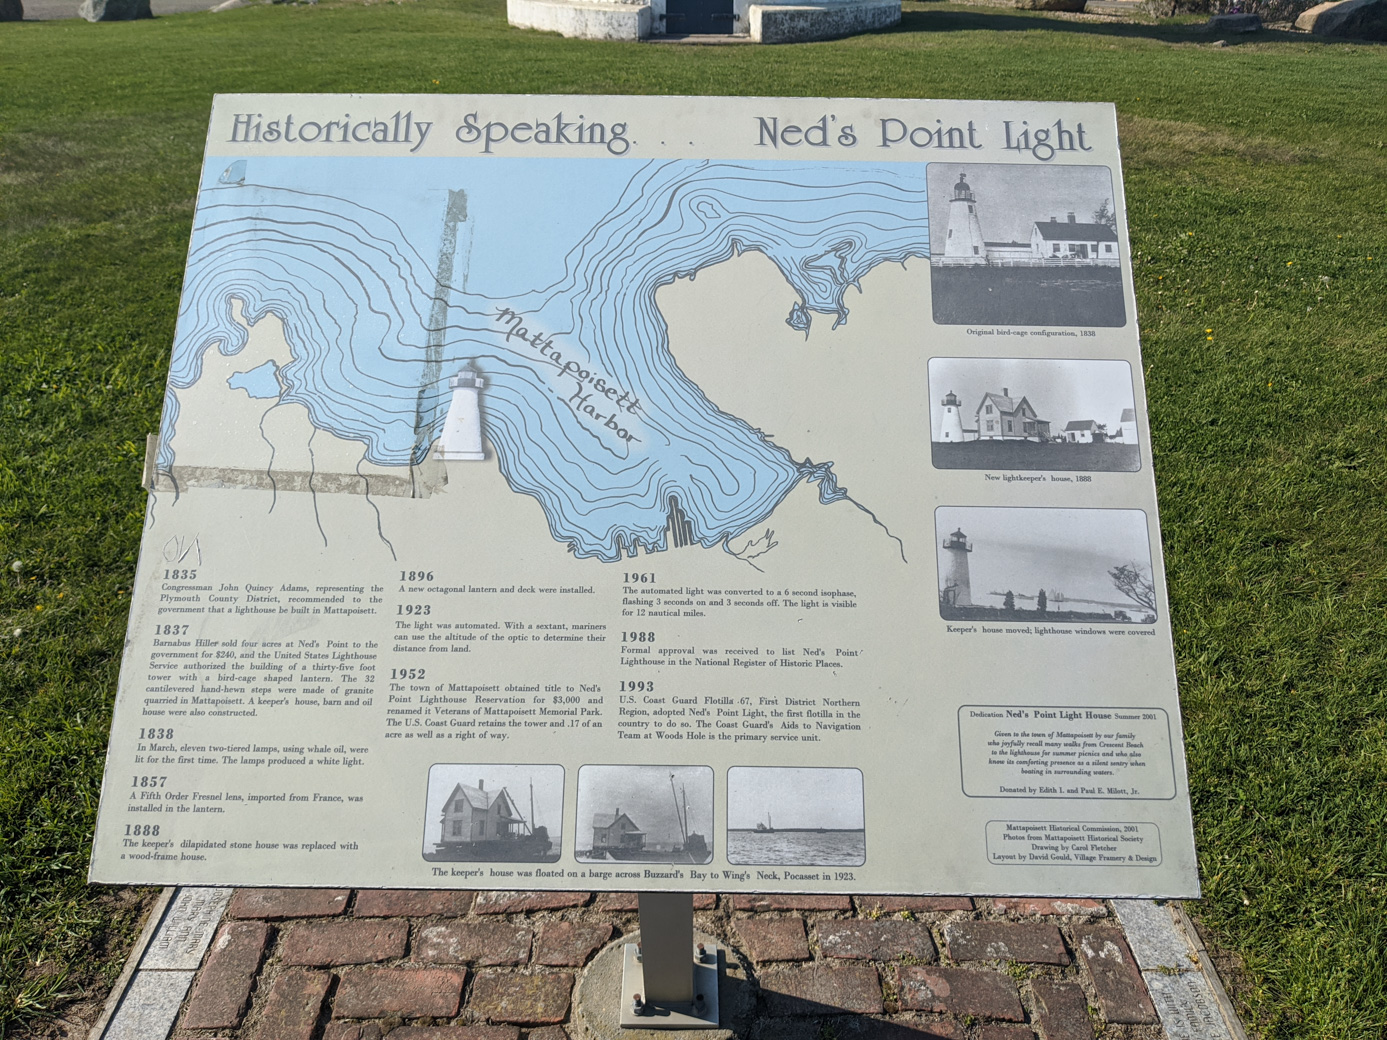 Information sign at Neds Point Lighthouse